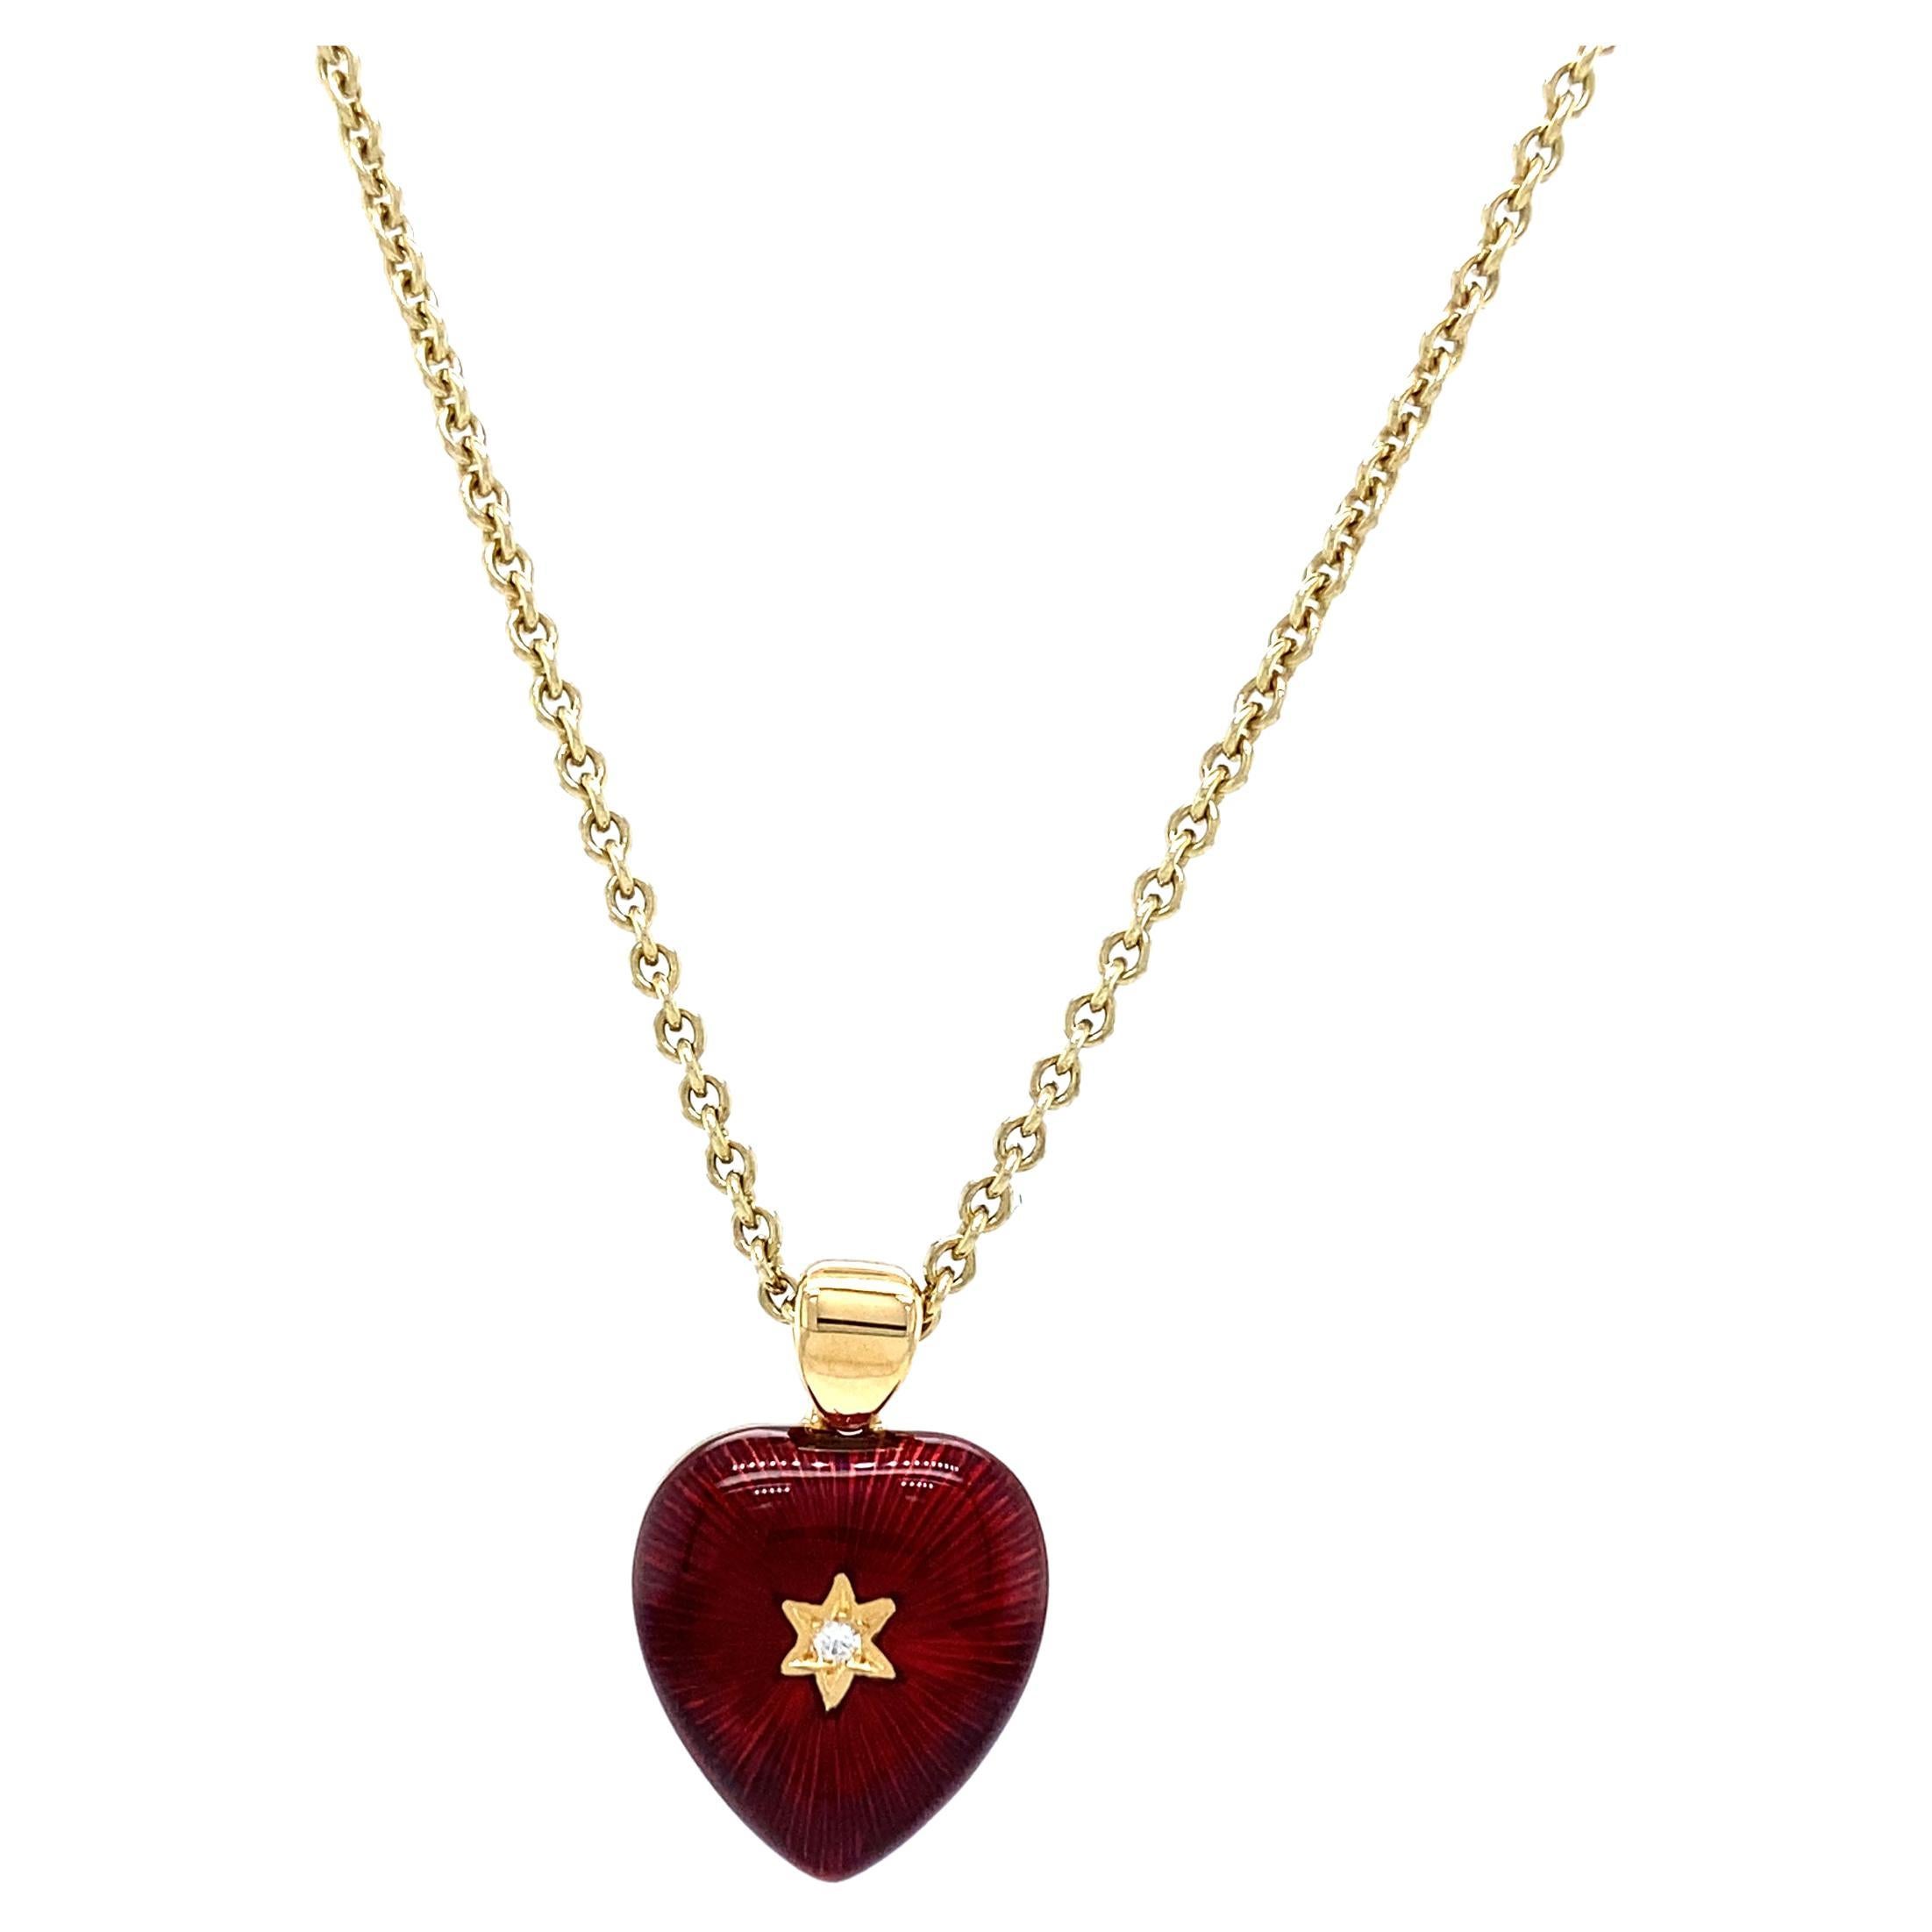 Heart Pendant Necklace 18k Yellow Gold Red and Green Enamel 2 Diamonds 2.02ct